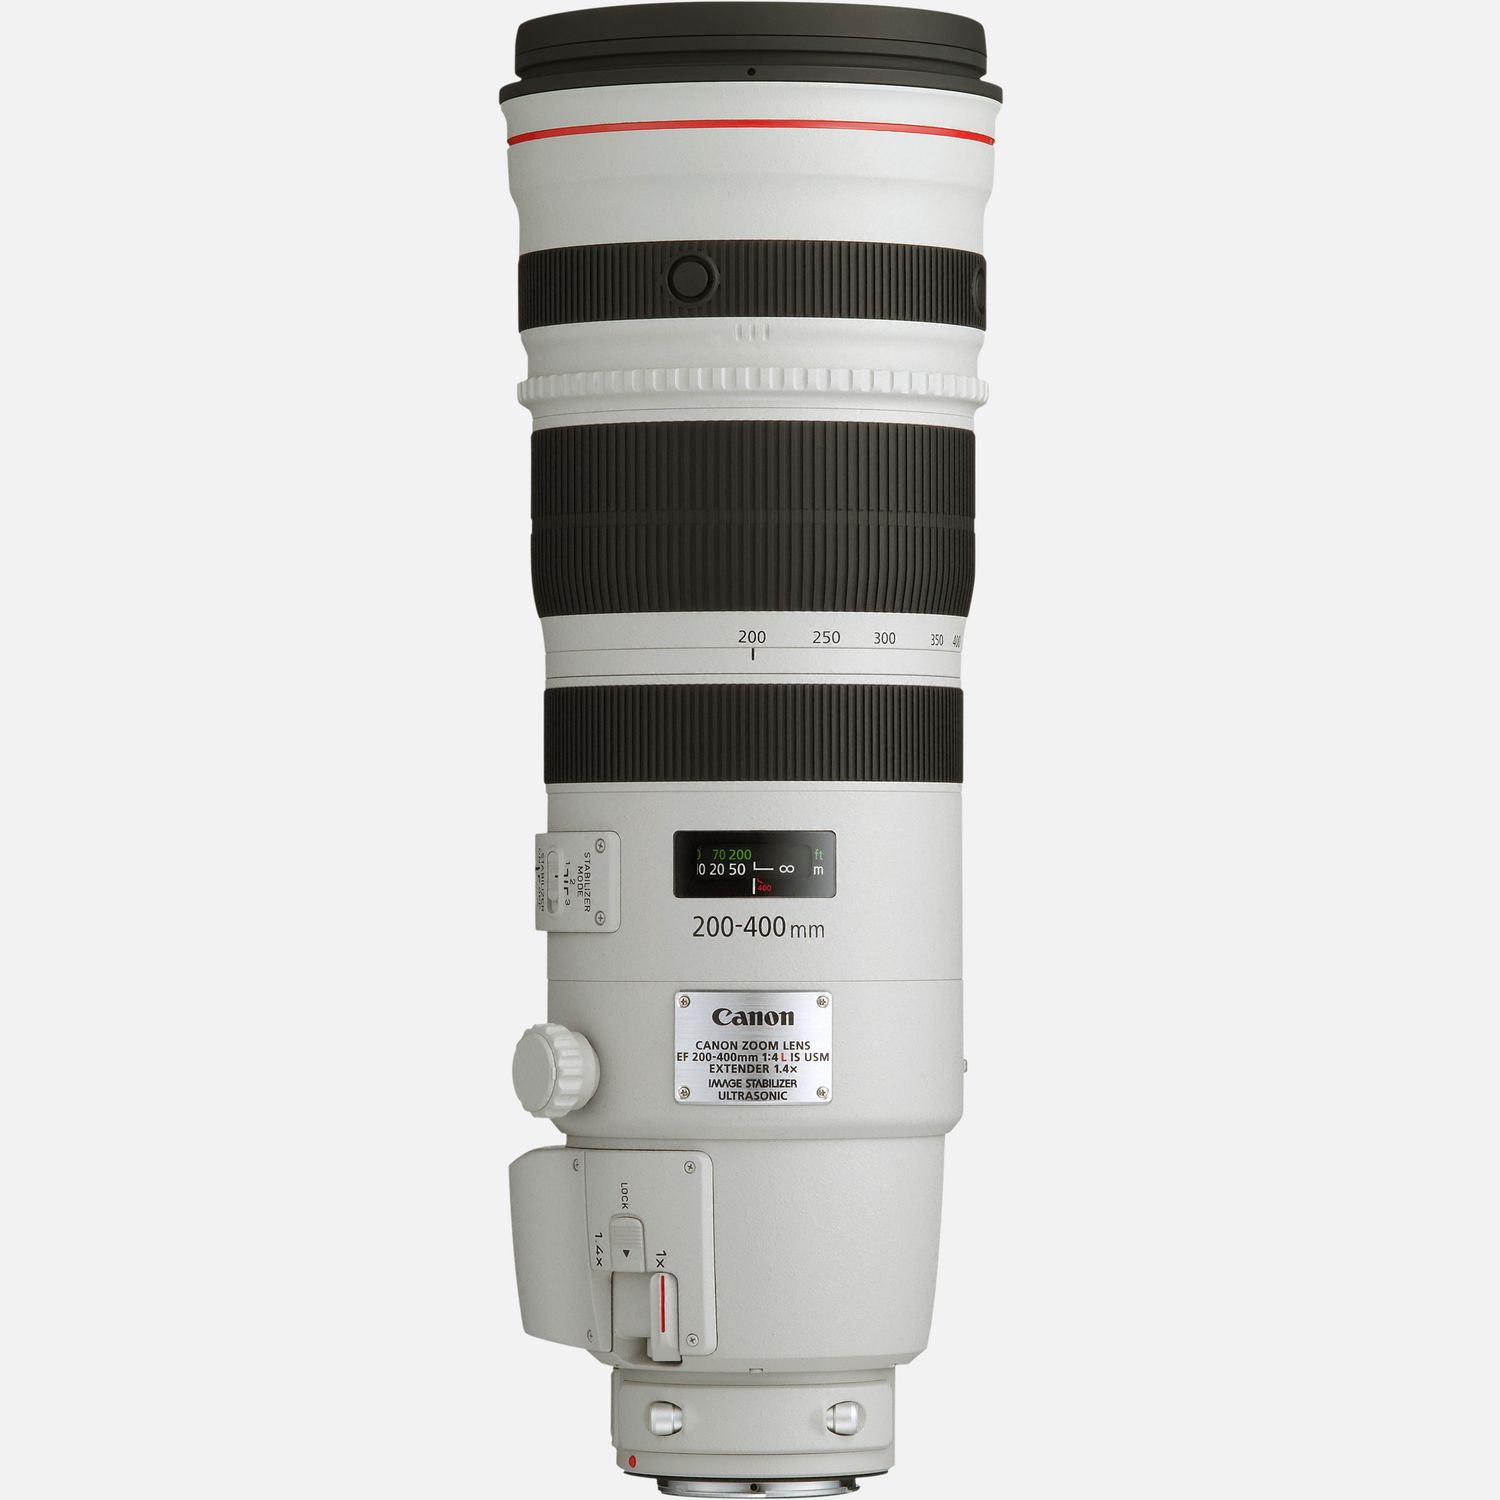 Objectif Canon EF 200-400mm f/4L IS USM Extender 1.4x